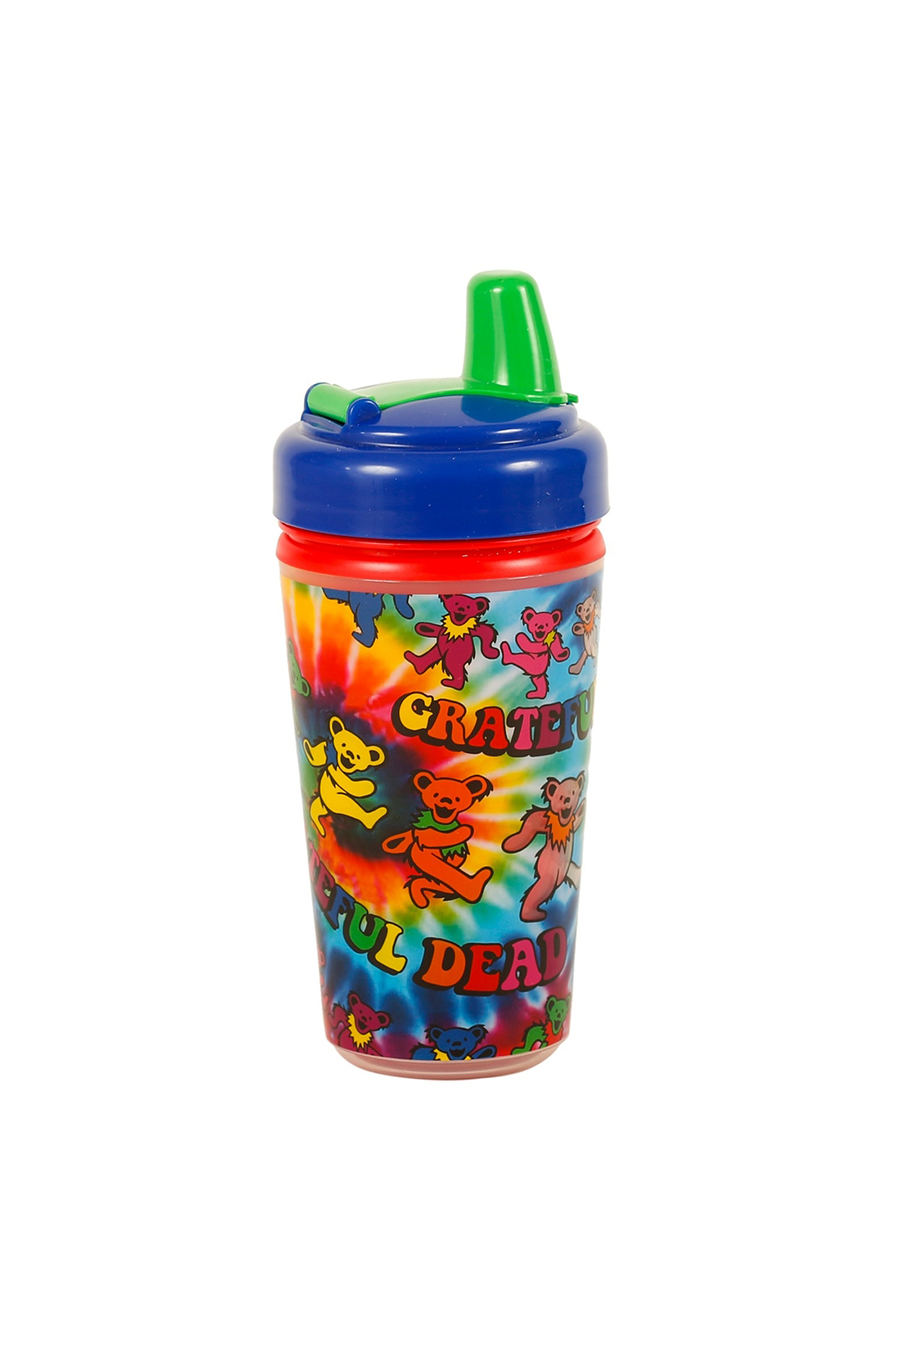 Grateful Dead Tie Dye Sippy Cup - Main Image Number 2 of 2